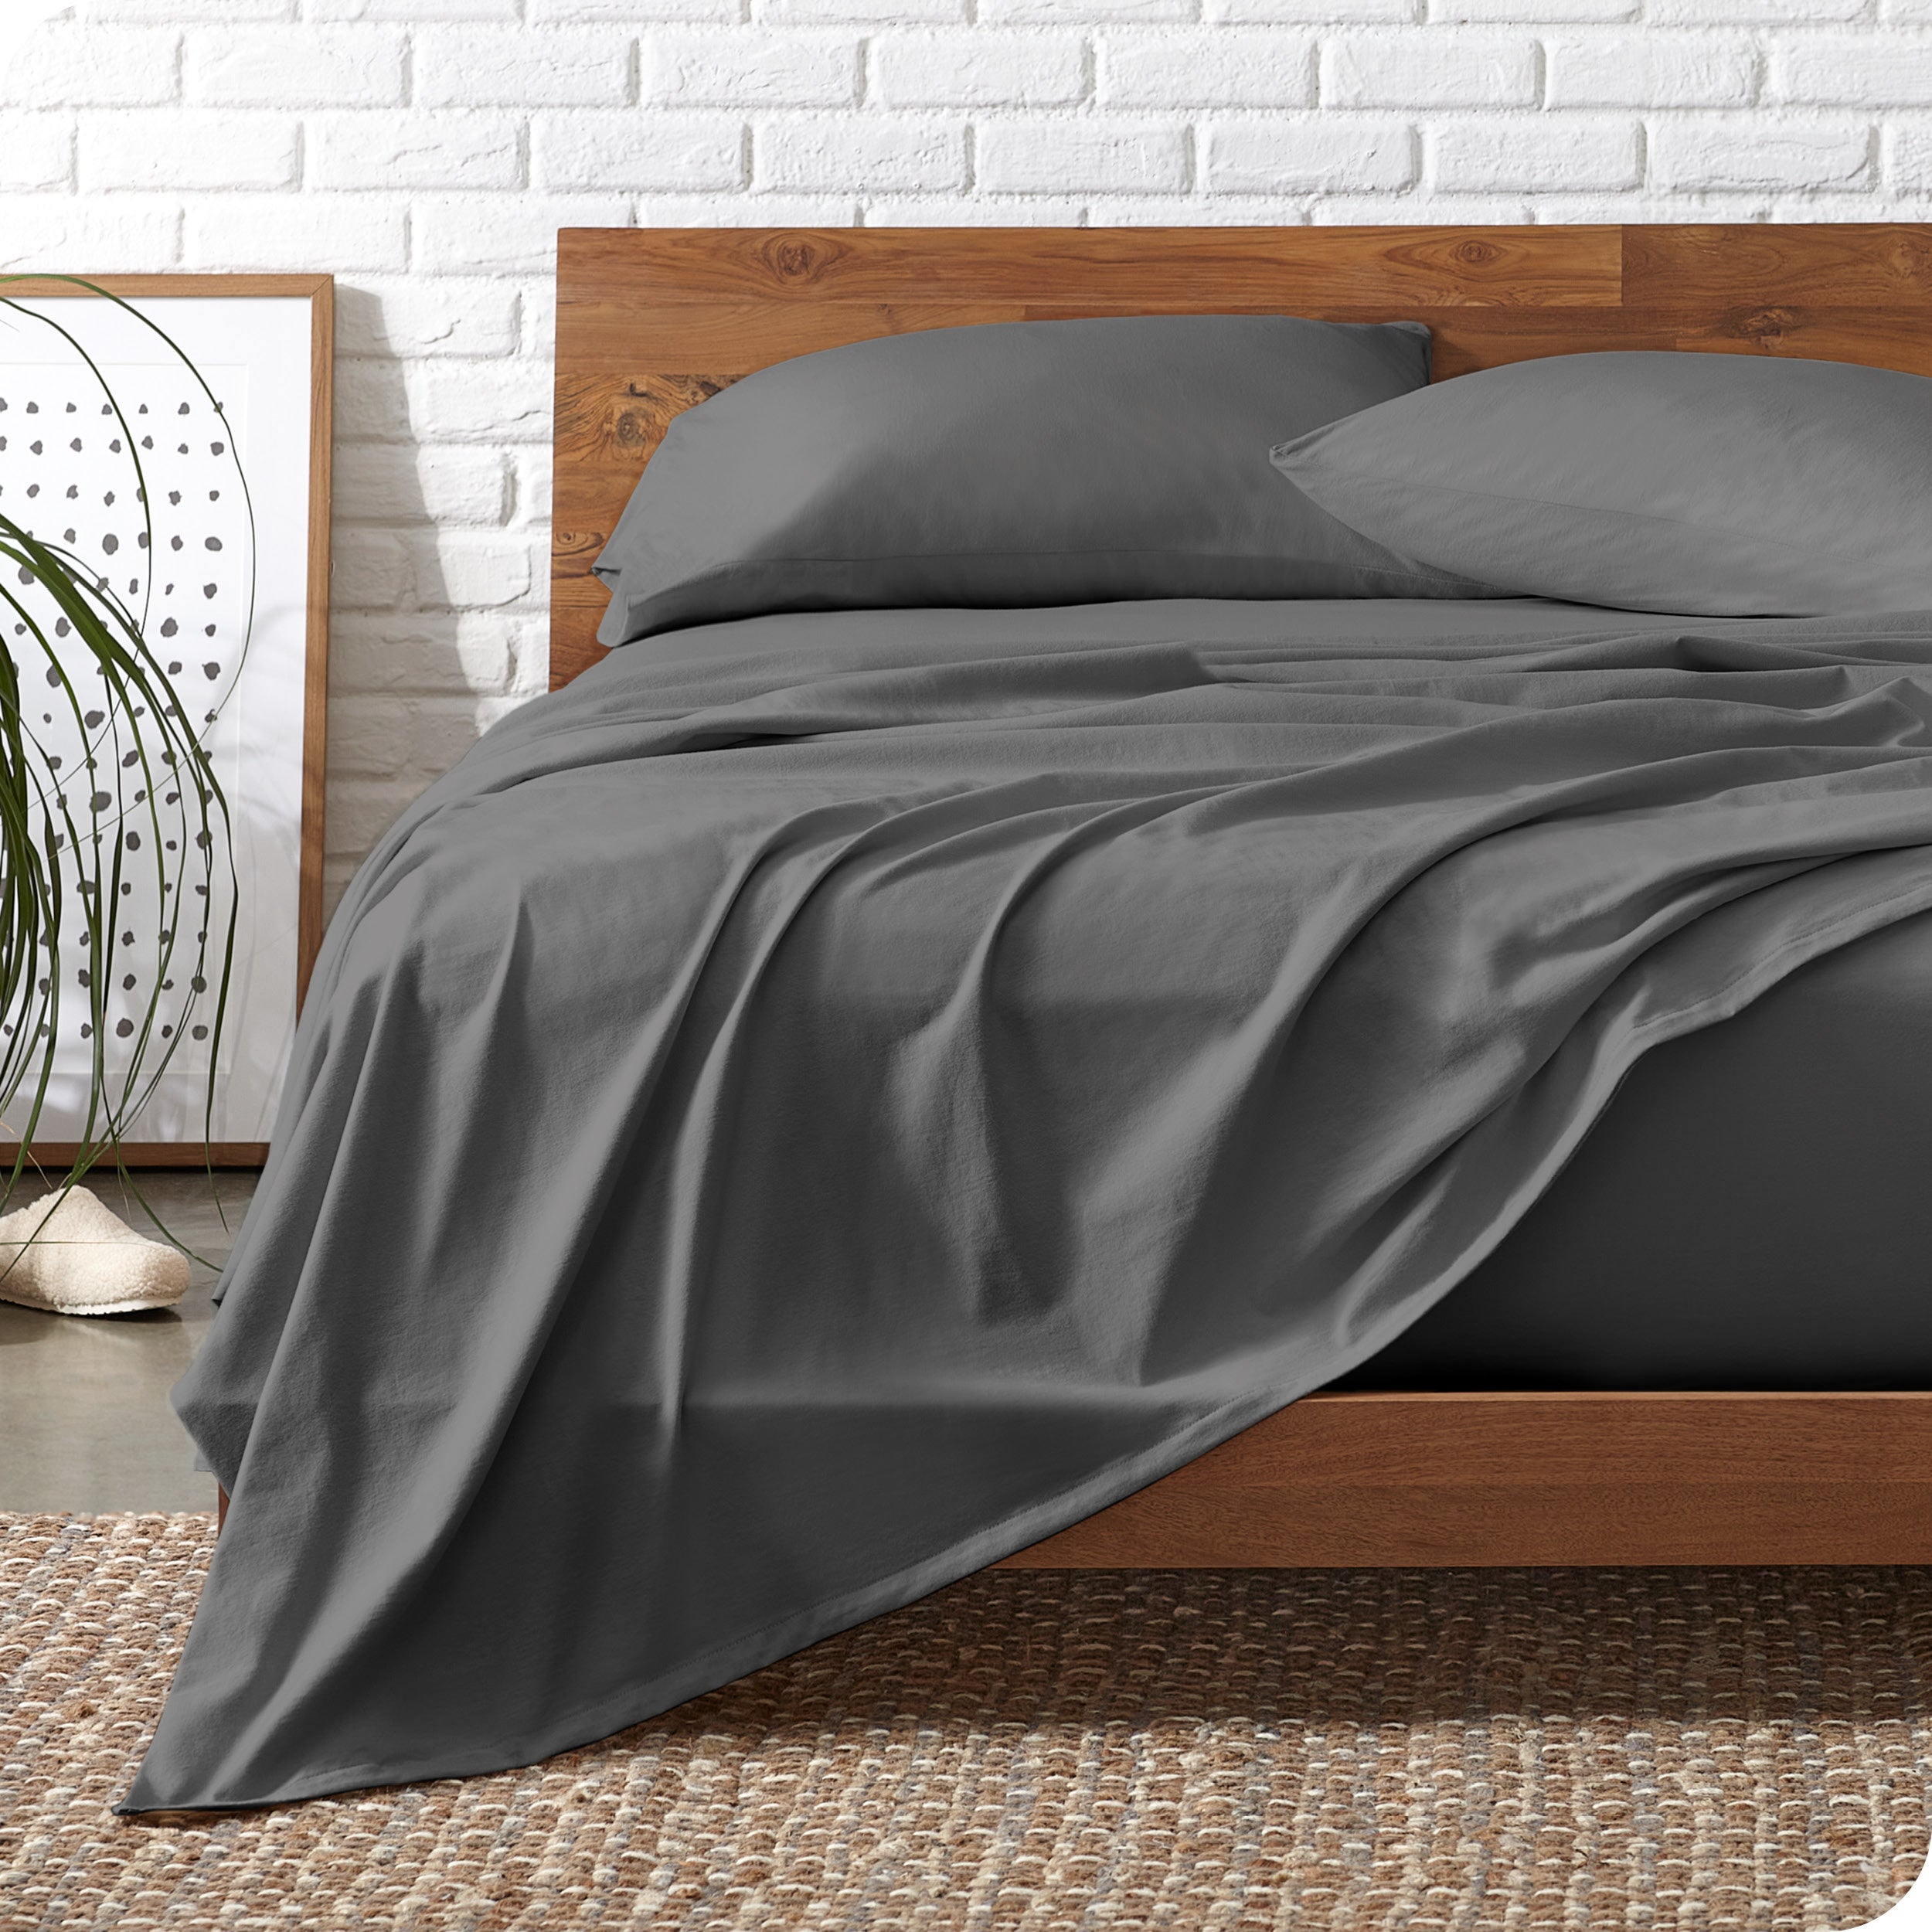 Wooden bed frame with grey organic cotton jersey sheets on the bed